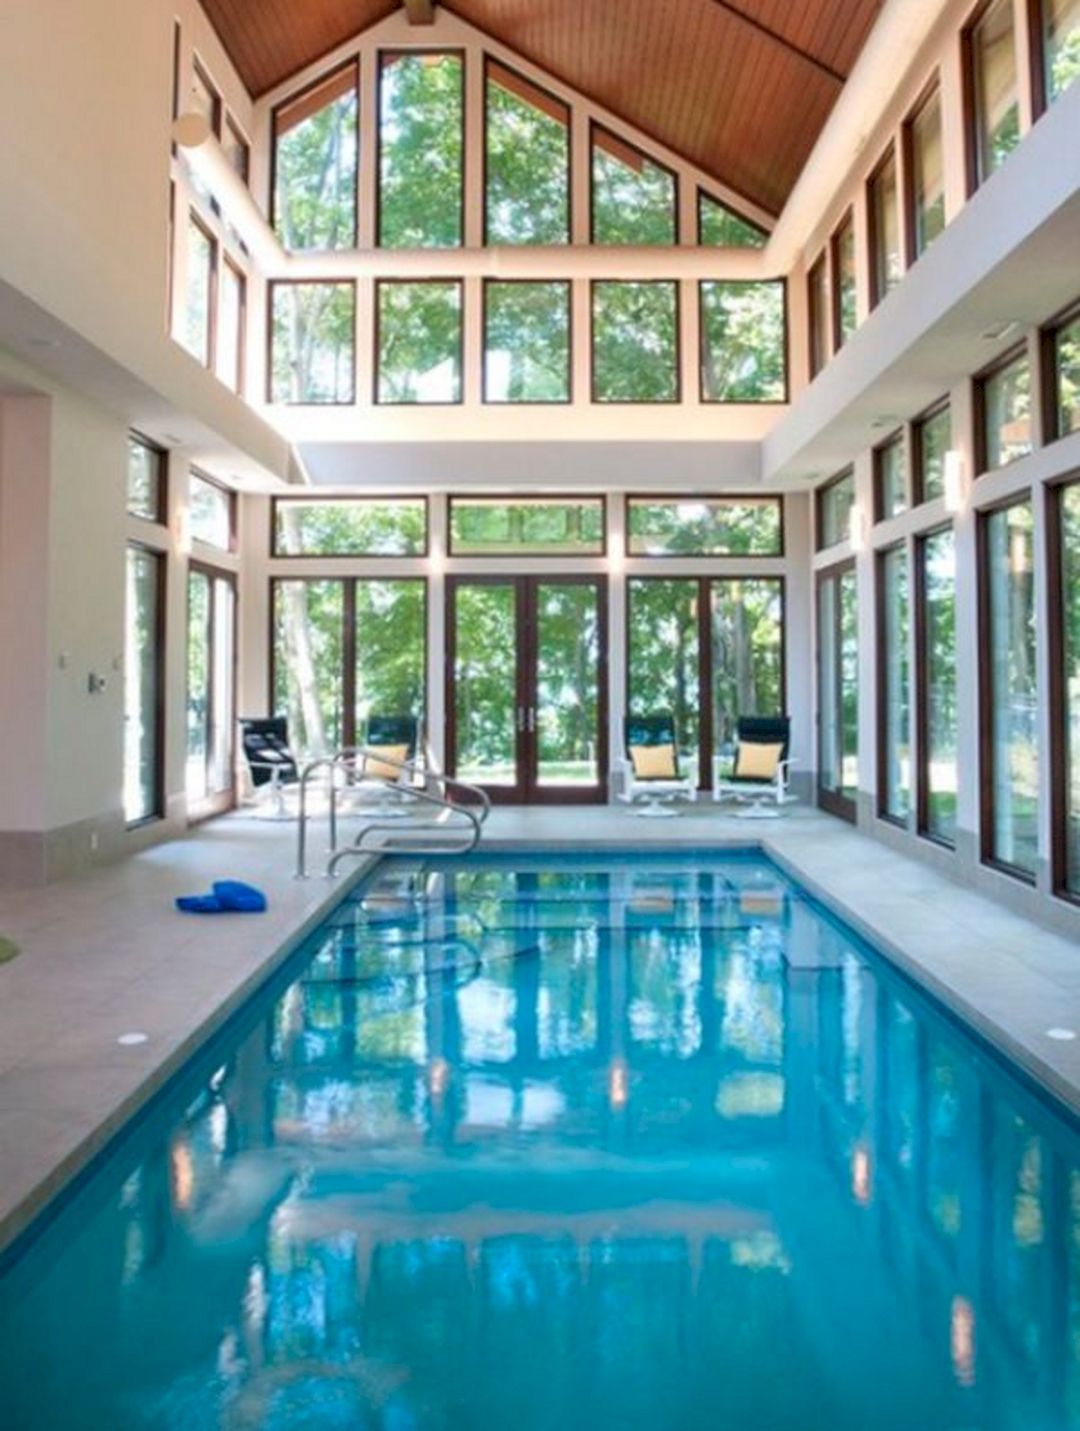 Creatice Indoor Pool Pics for Large Space